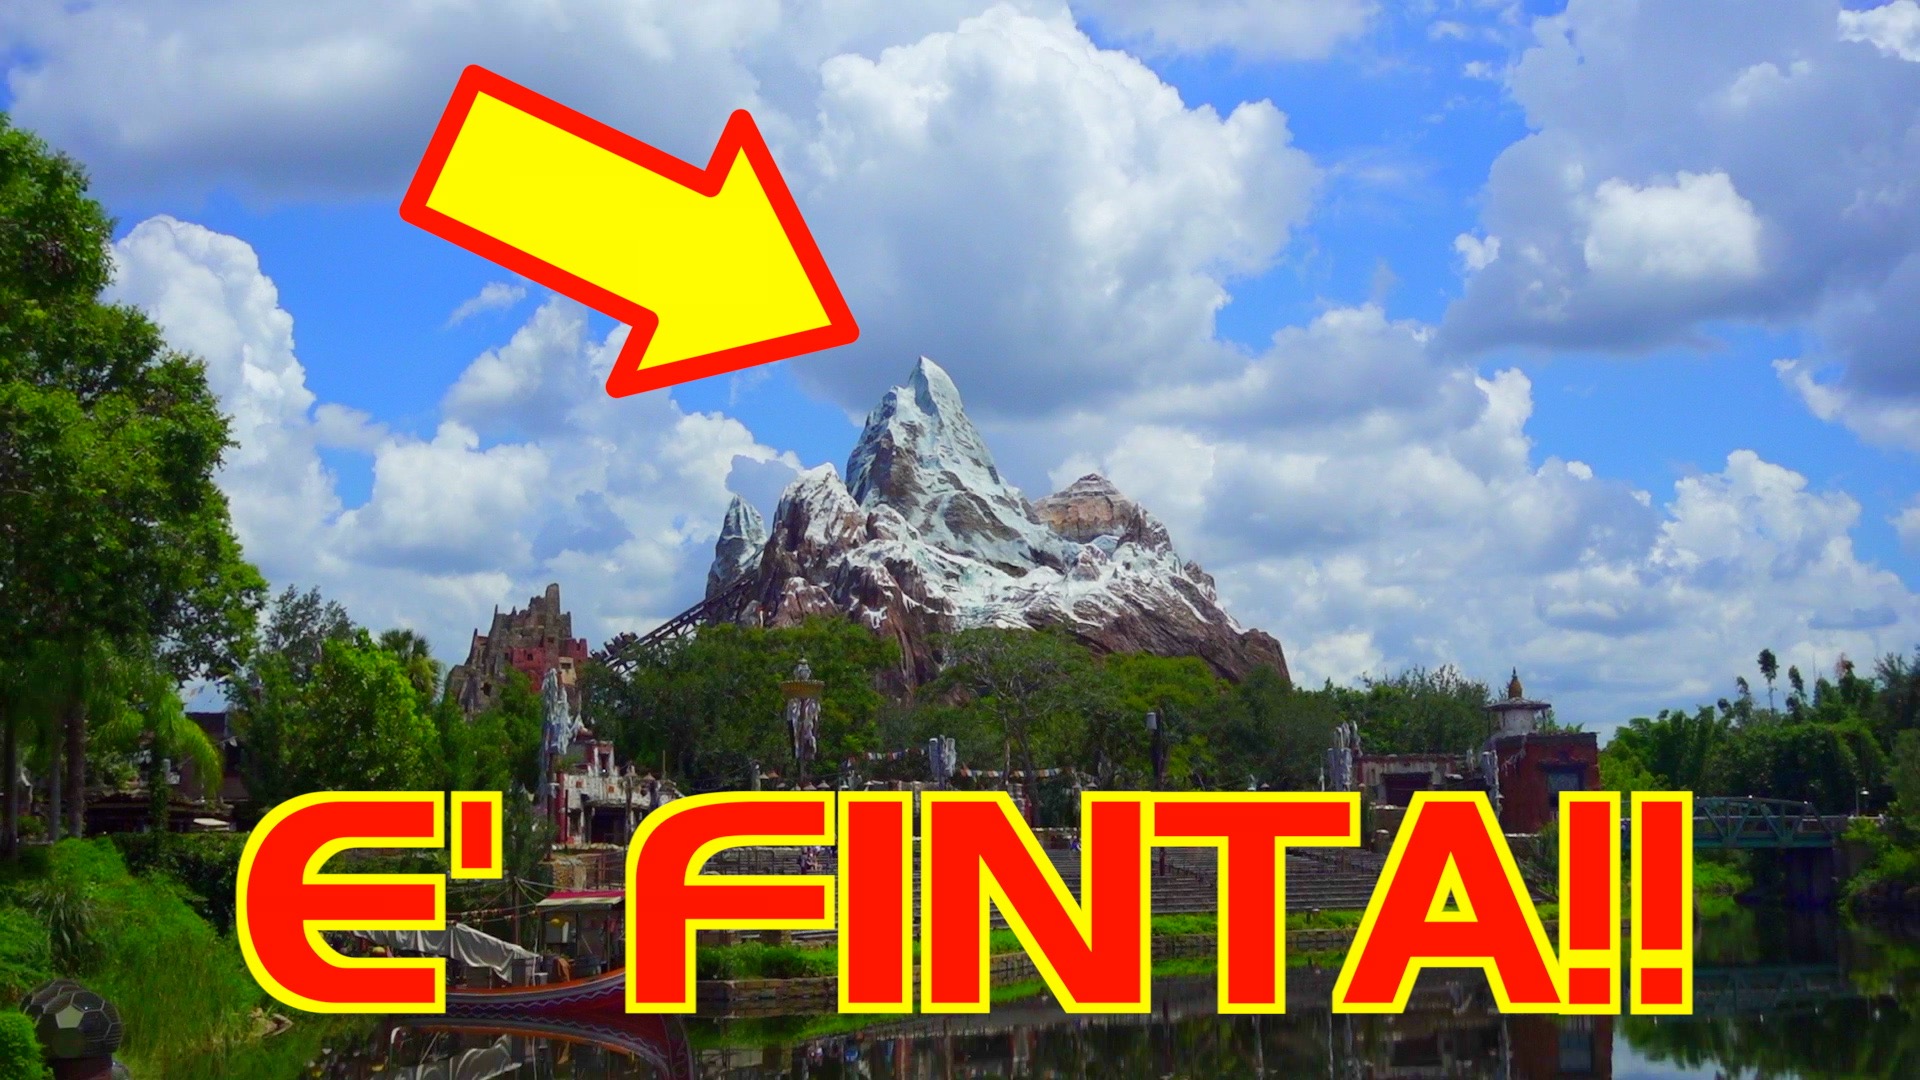 expedition everest